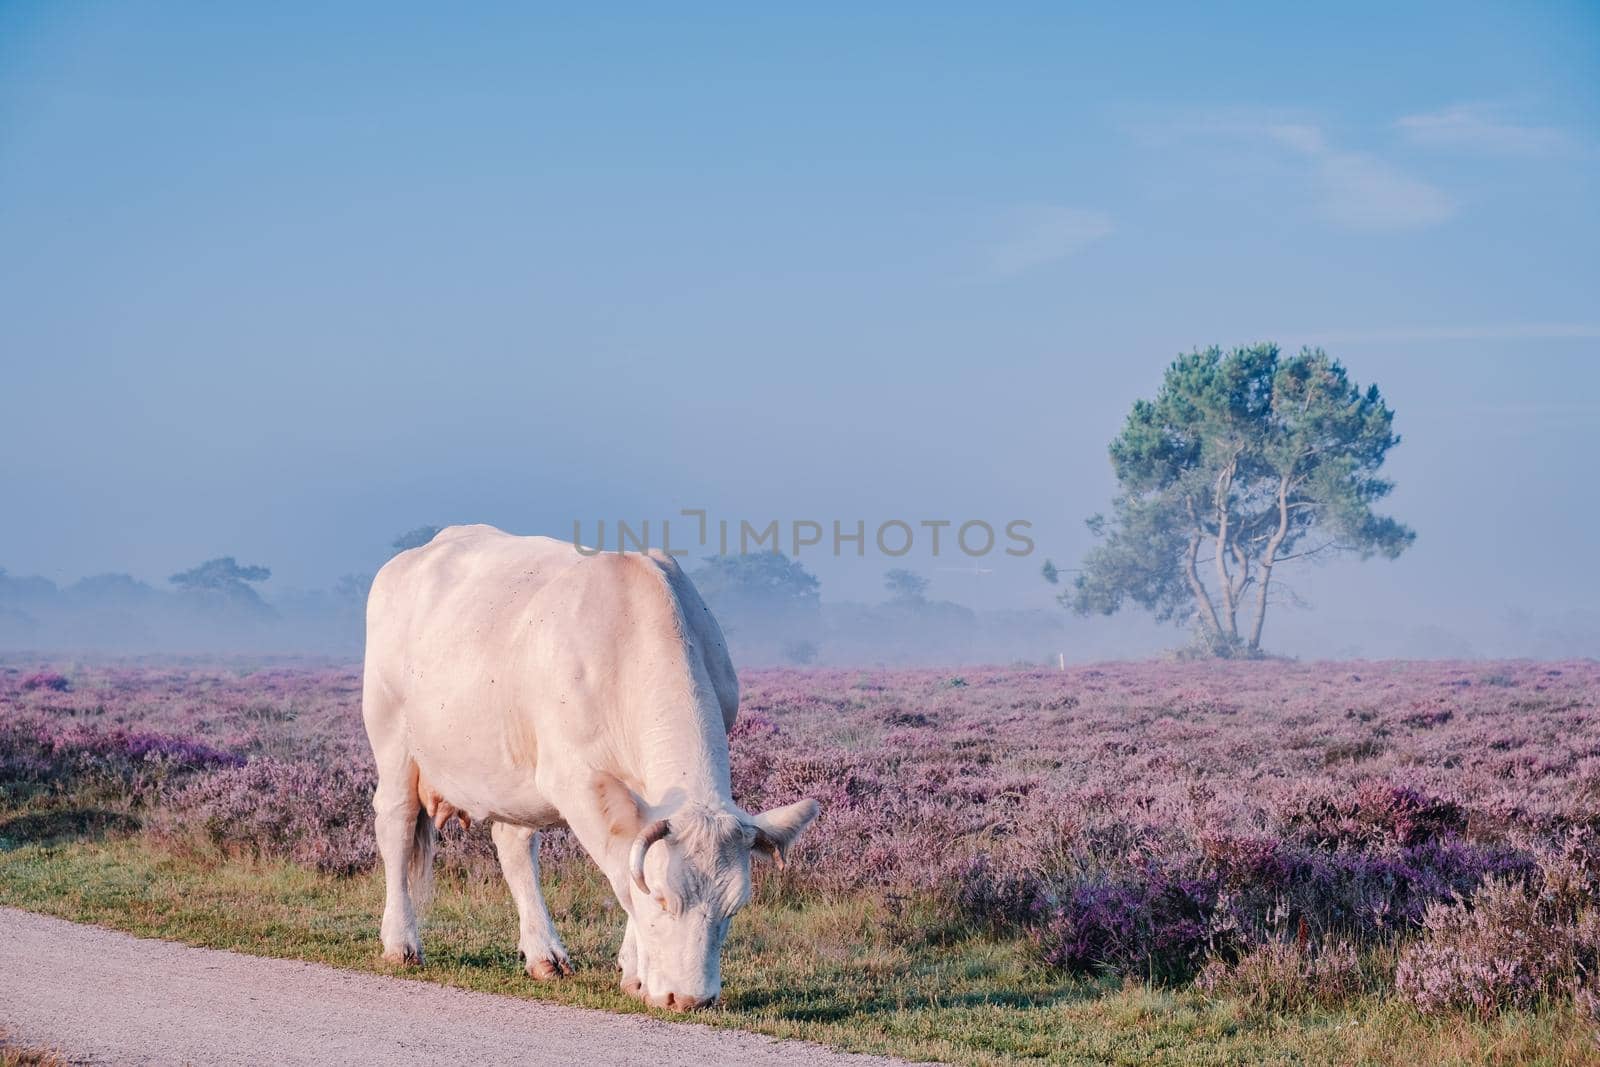 Blooming heather in the Netherlands,Sunny foggy Sunrise over the pink purple hills at Westerheid park Netherlands, blooming Heather fields in the Netherlands during Sunrise . Holland Europe